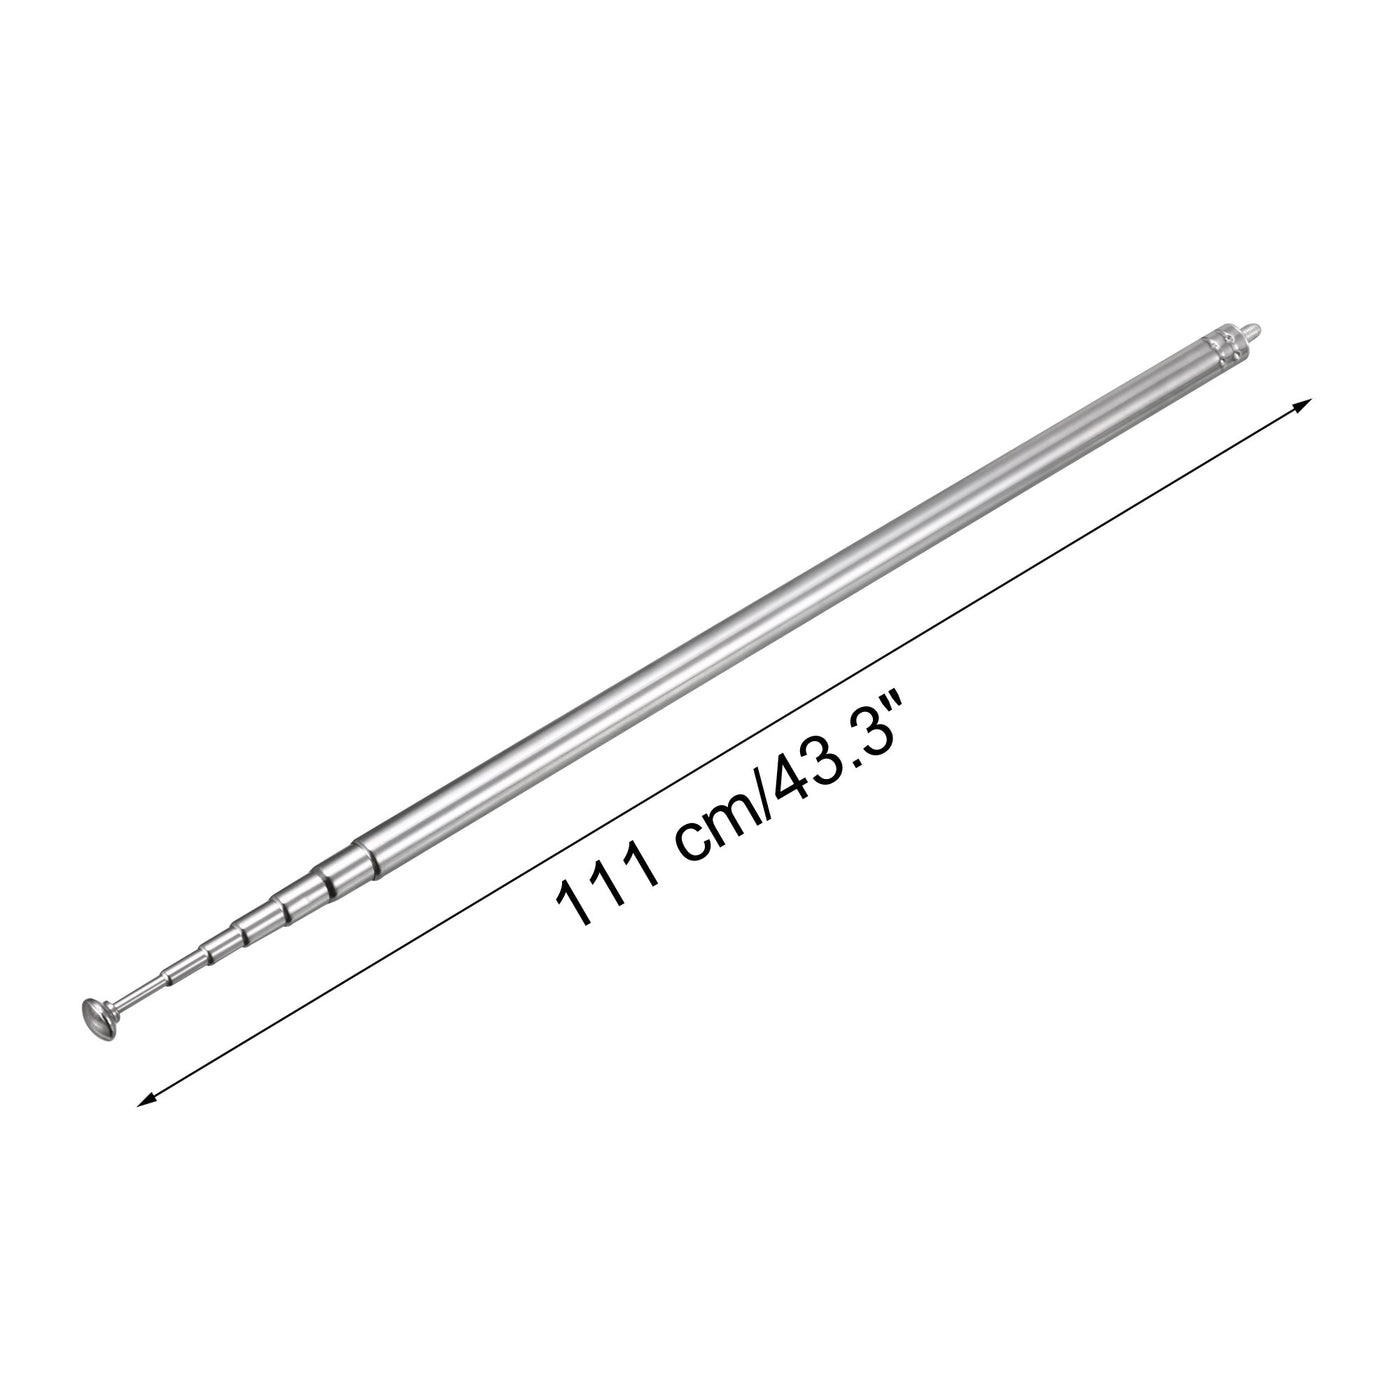 uxcell Uxcell 5Pcs FM AM Radio 7 Sections Telescopic Antenna Aerial Mast 360 Degree Rod 111cm